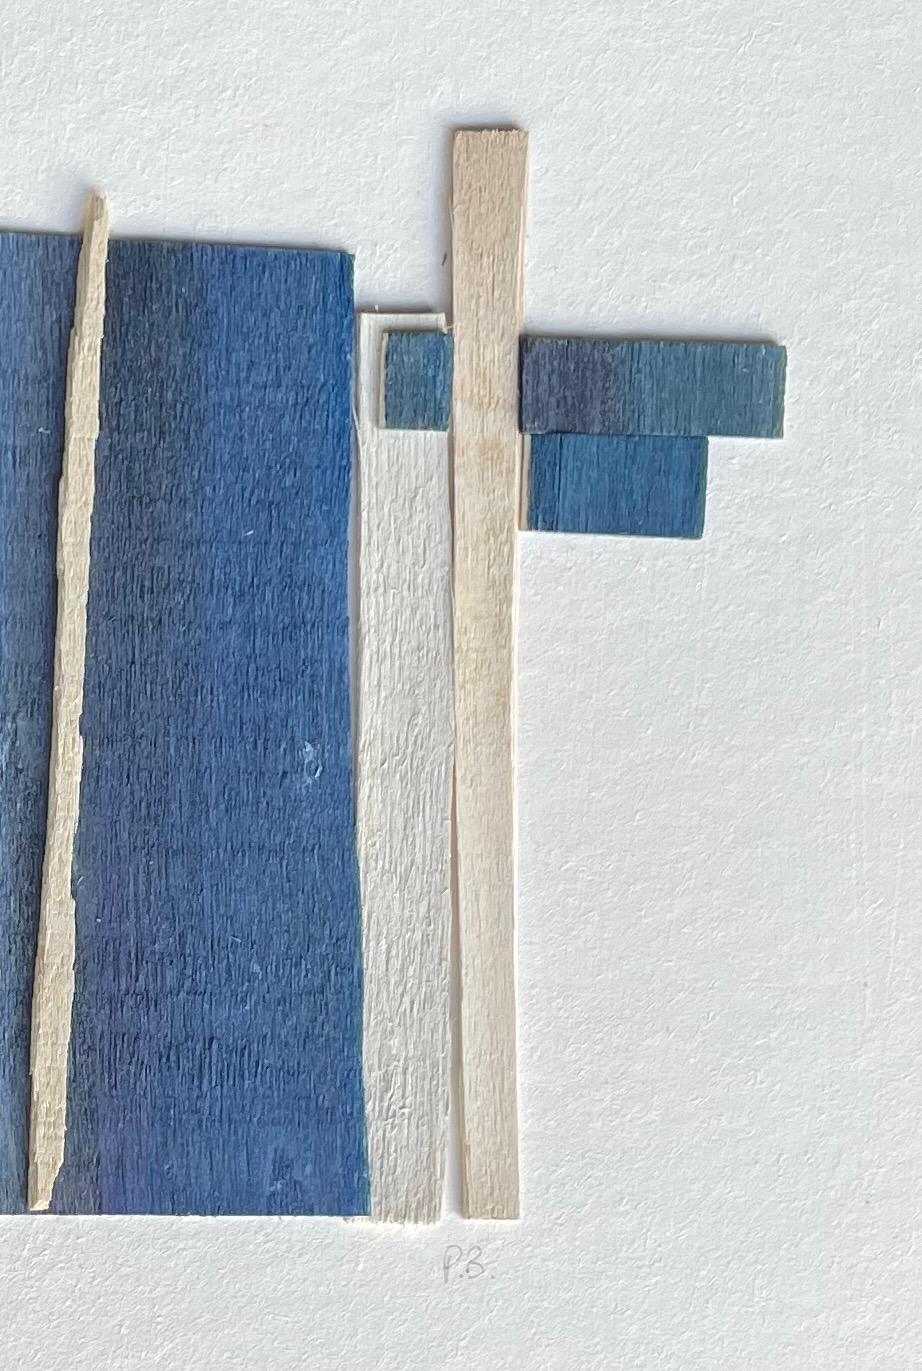 Shades of Blue and Cream Thin Slices of Wood, France, Contemporary 1